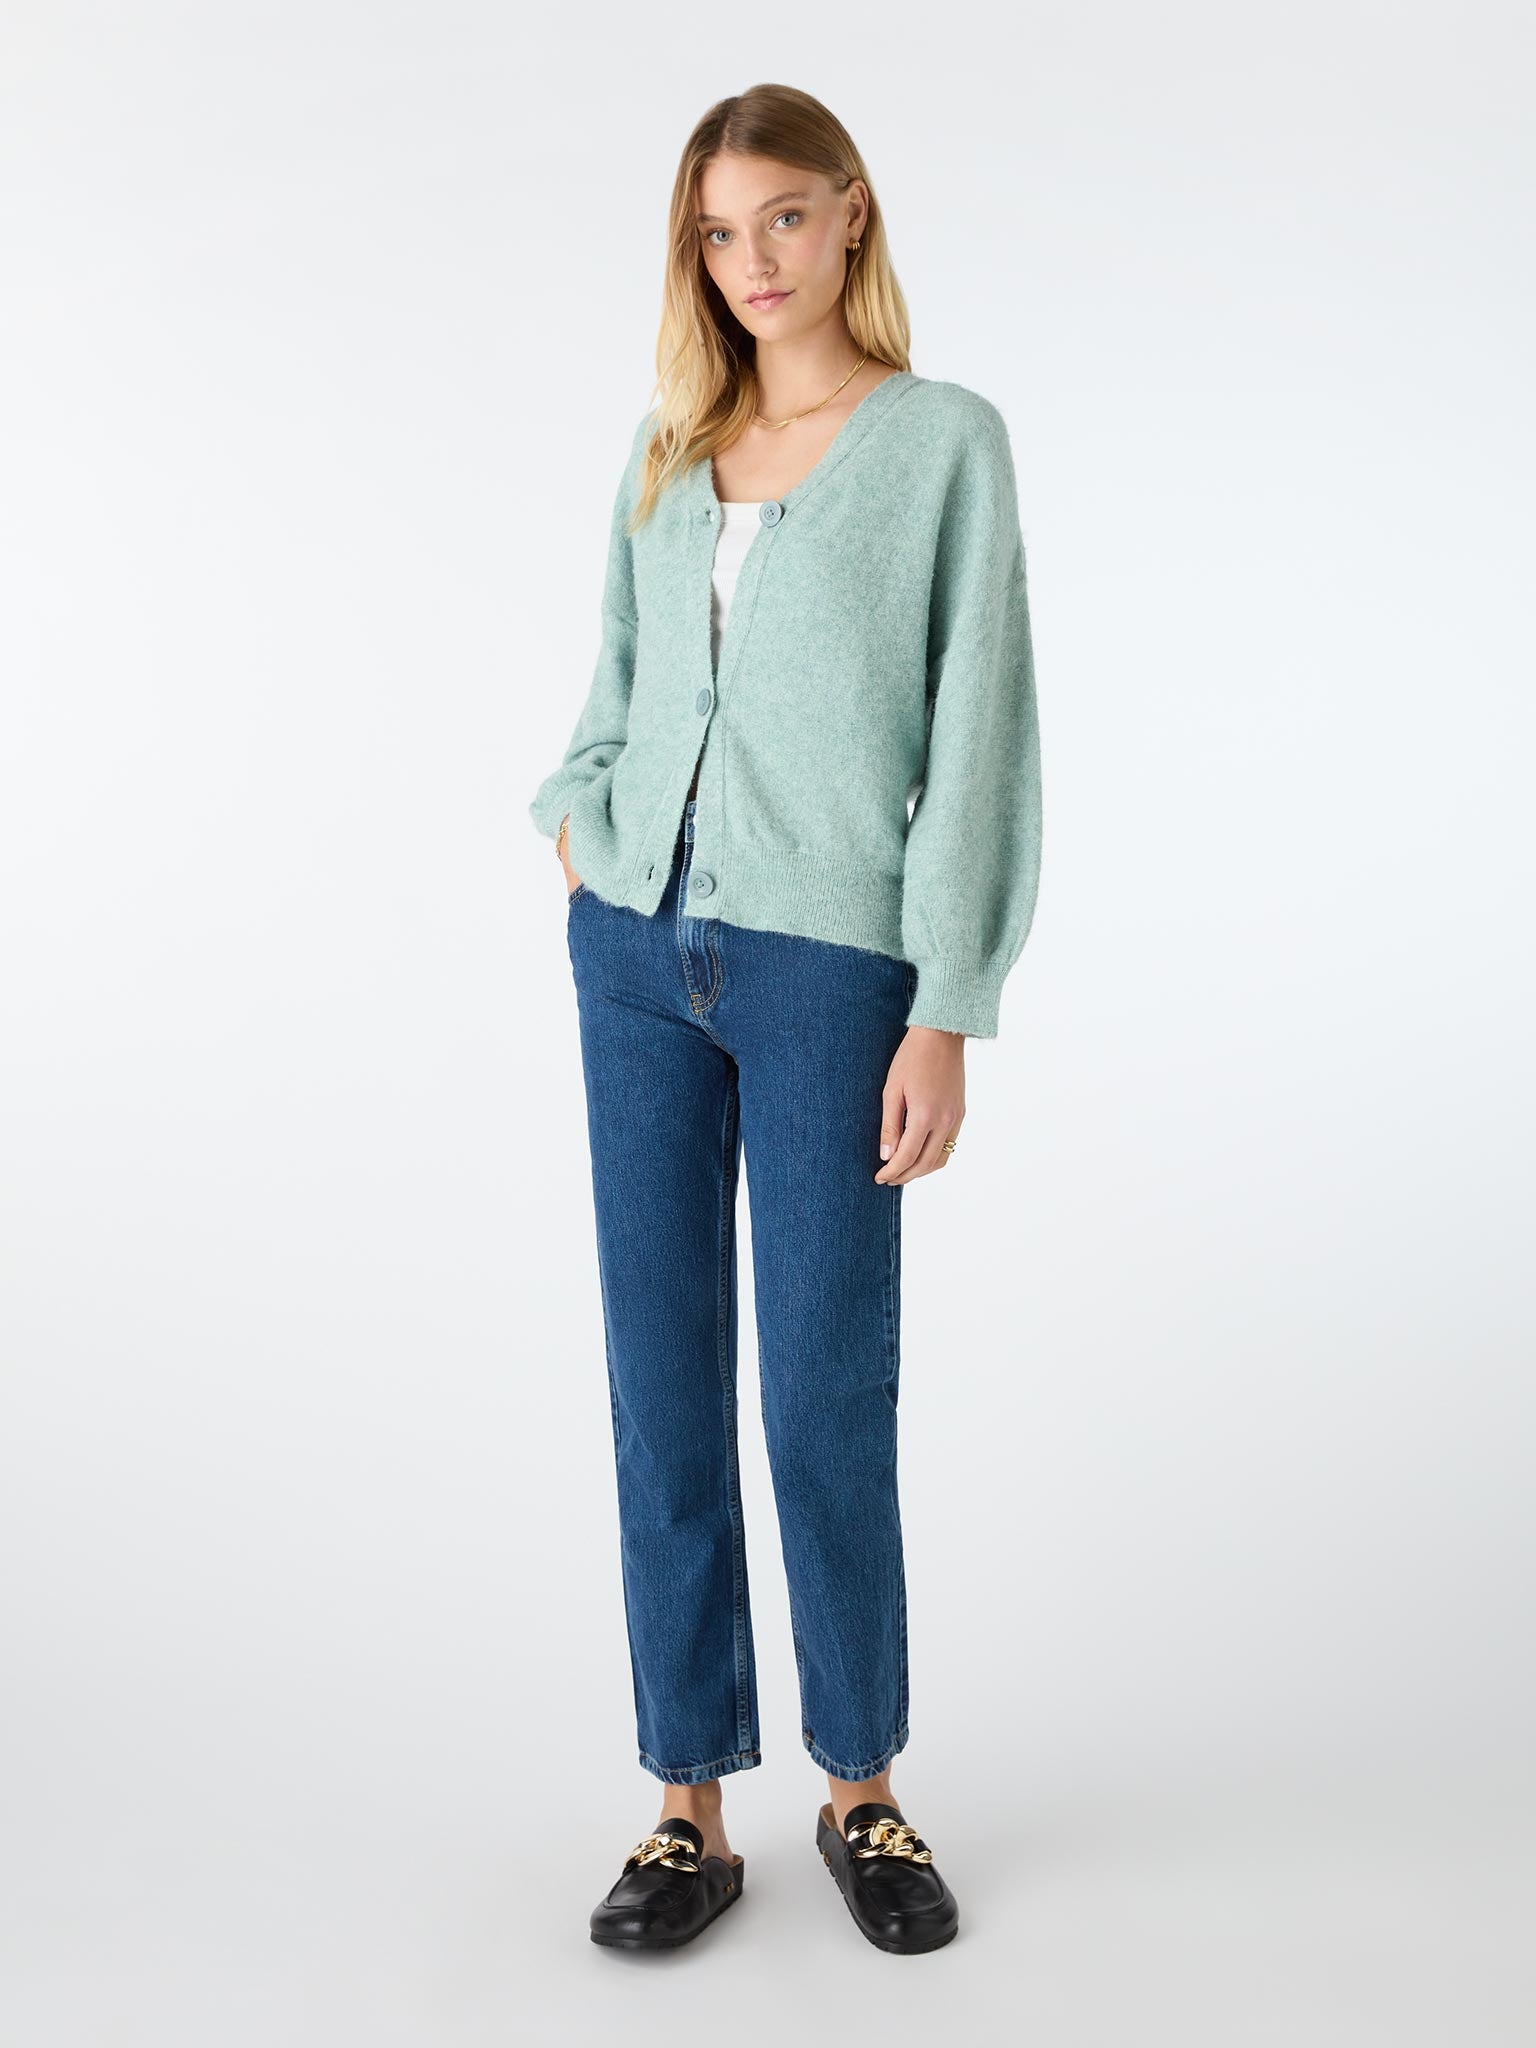 Honor Cardigan in Aqua | OMNES | Knitwear | Sustainable & Affordable Clothing | Shop Women's Fashion